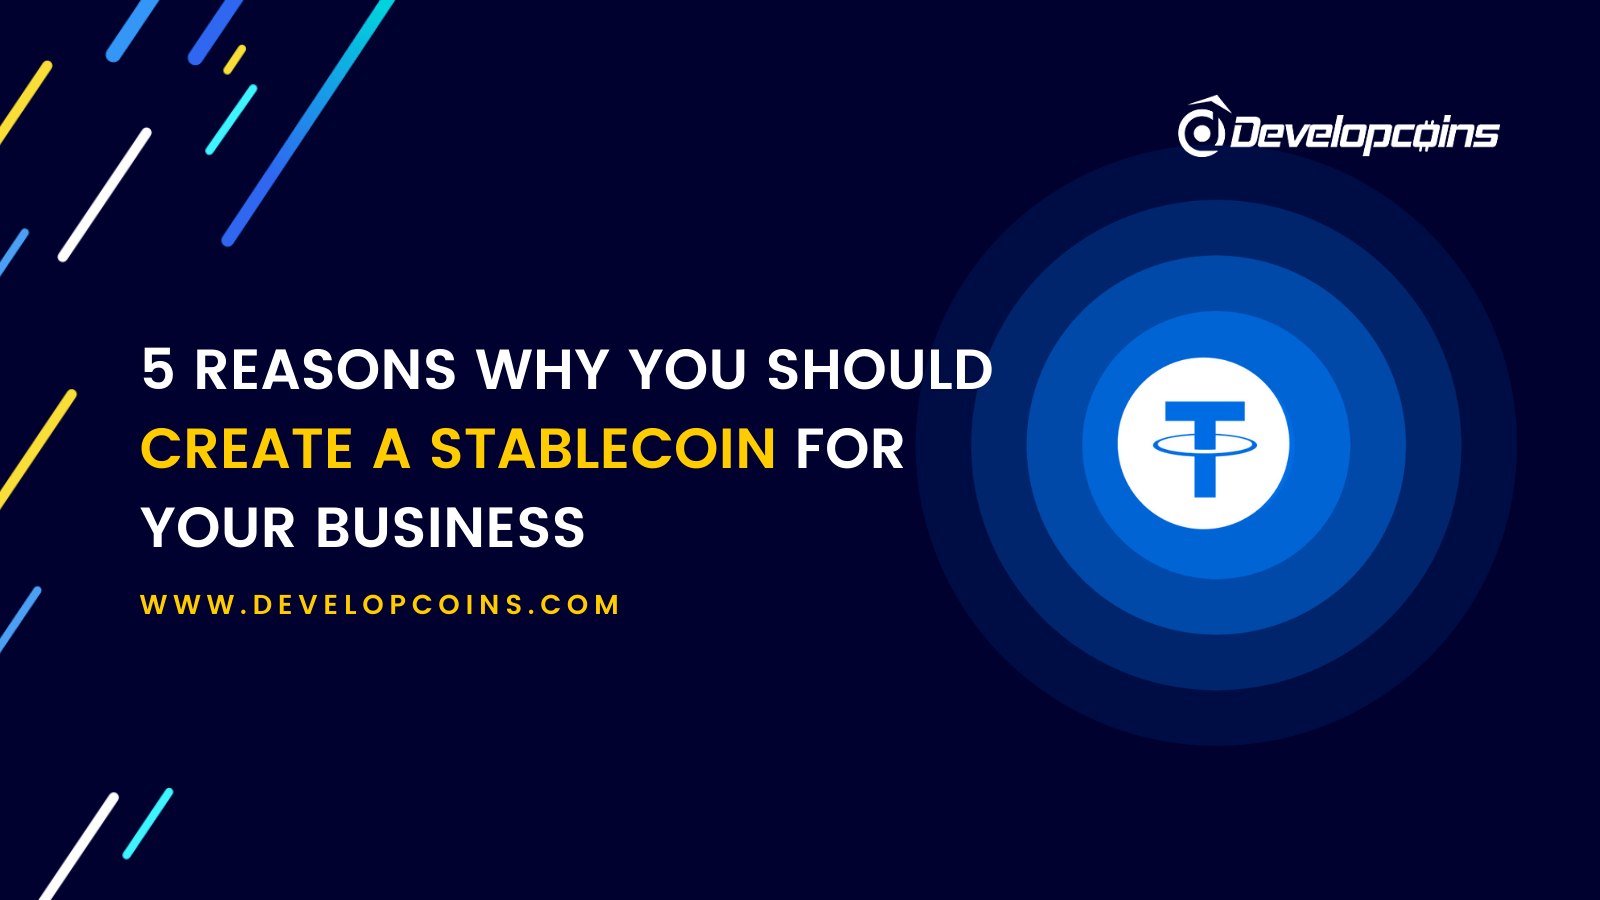 5 Reasons Why You Should Create A Stablecoin For Your Business